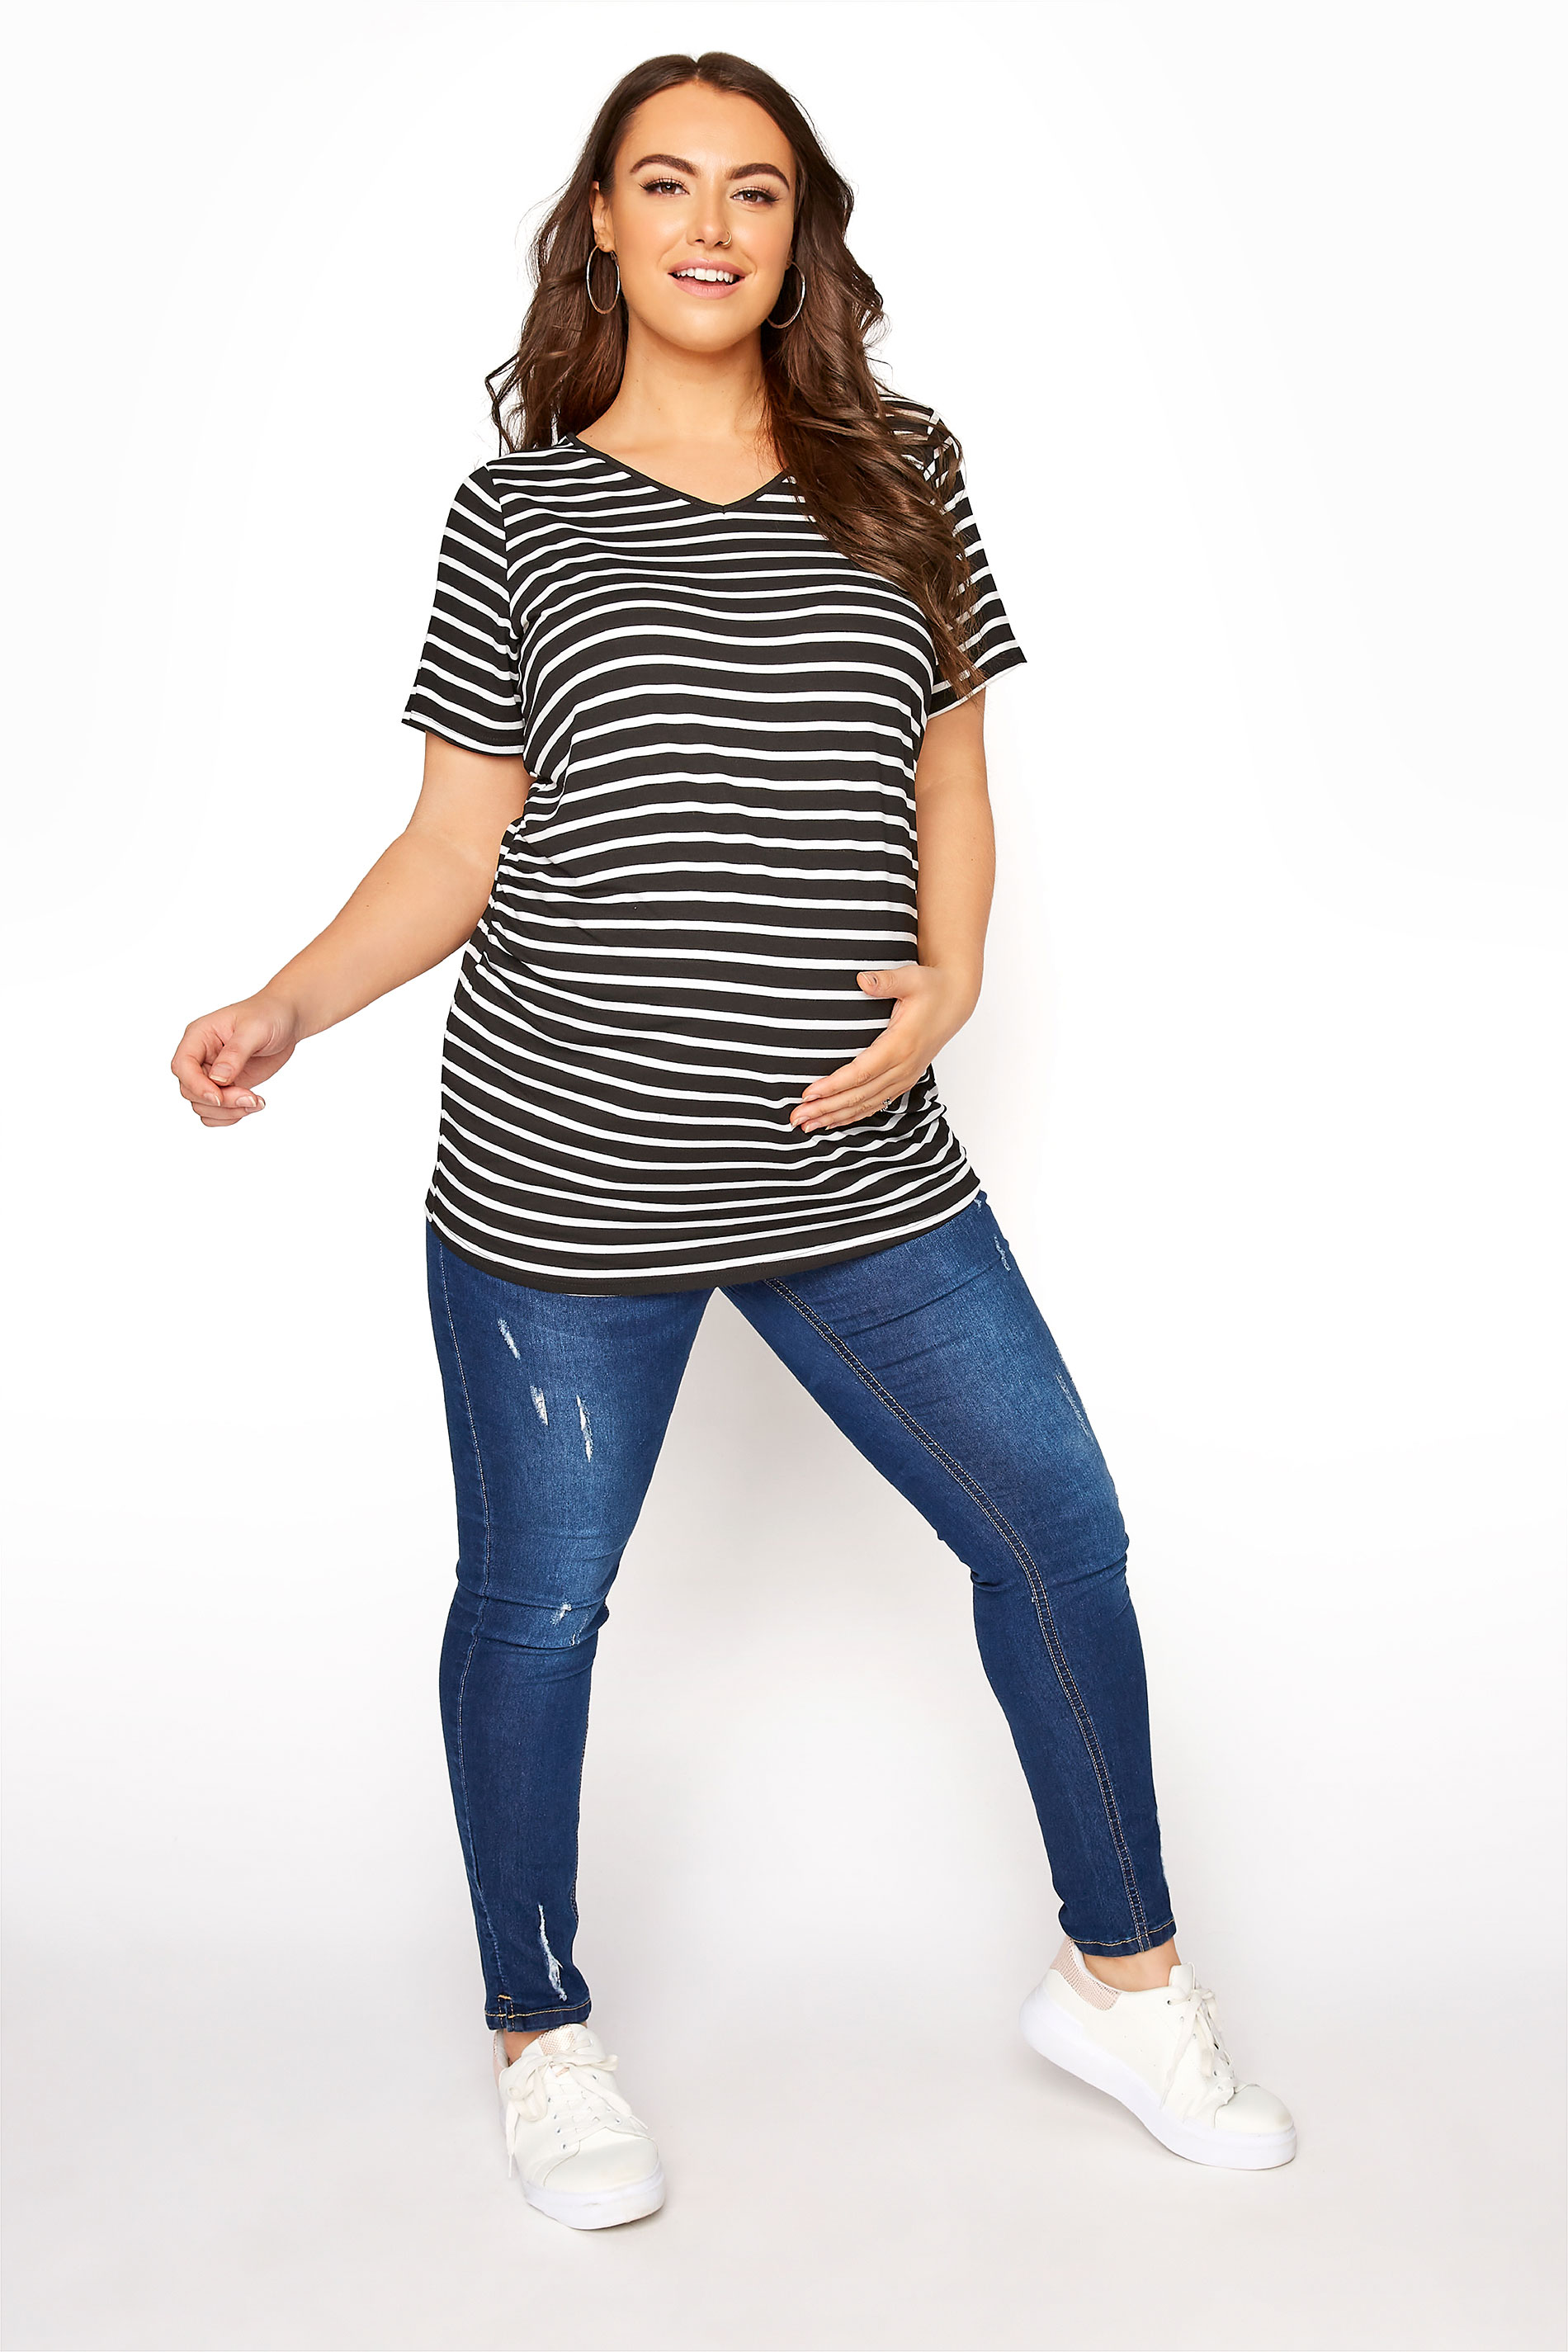 Grande taille  Tops Grande taille  T-Shirts | BUMP IT UP MATERNITY - T-Shirt Rayures Noires Manches Courtes - VZ86780